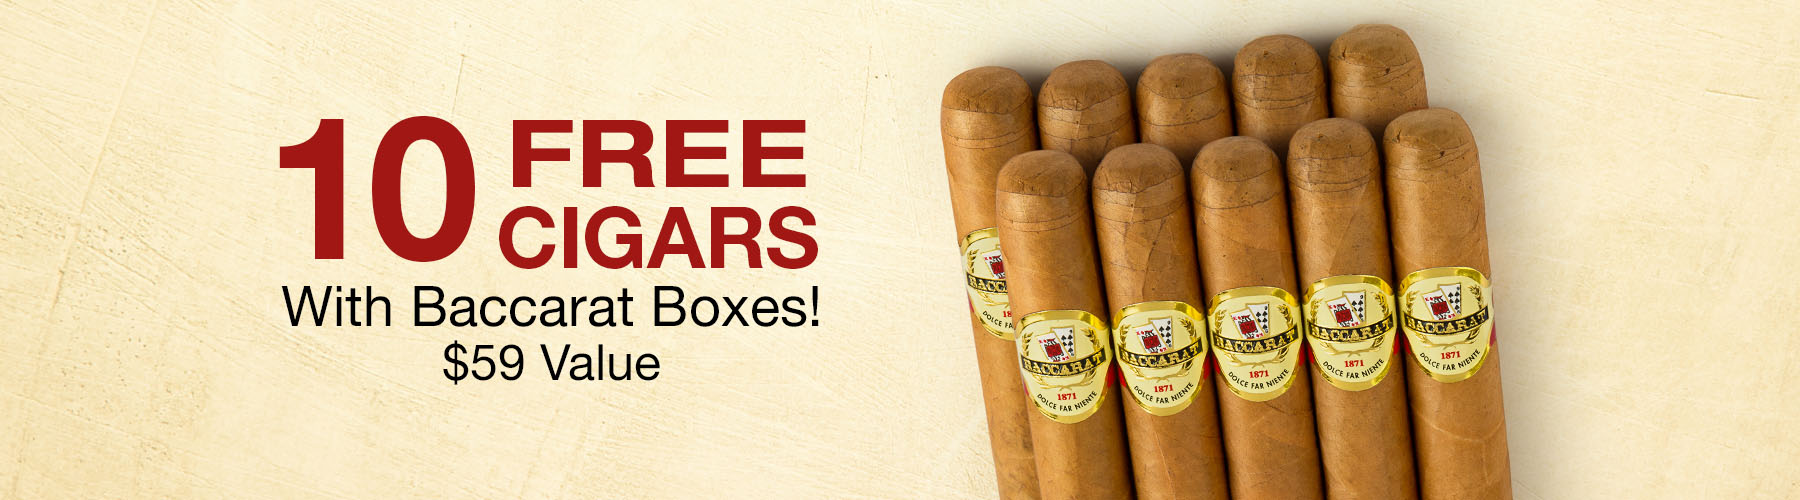 10 Free Cigars with Baccarat boxes!
$59 Value